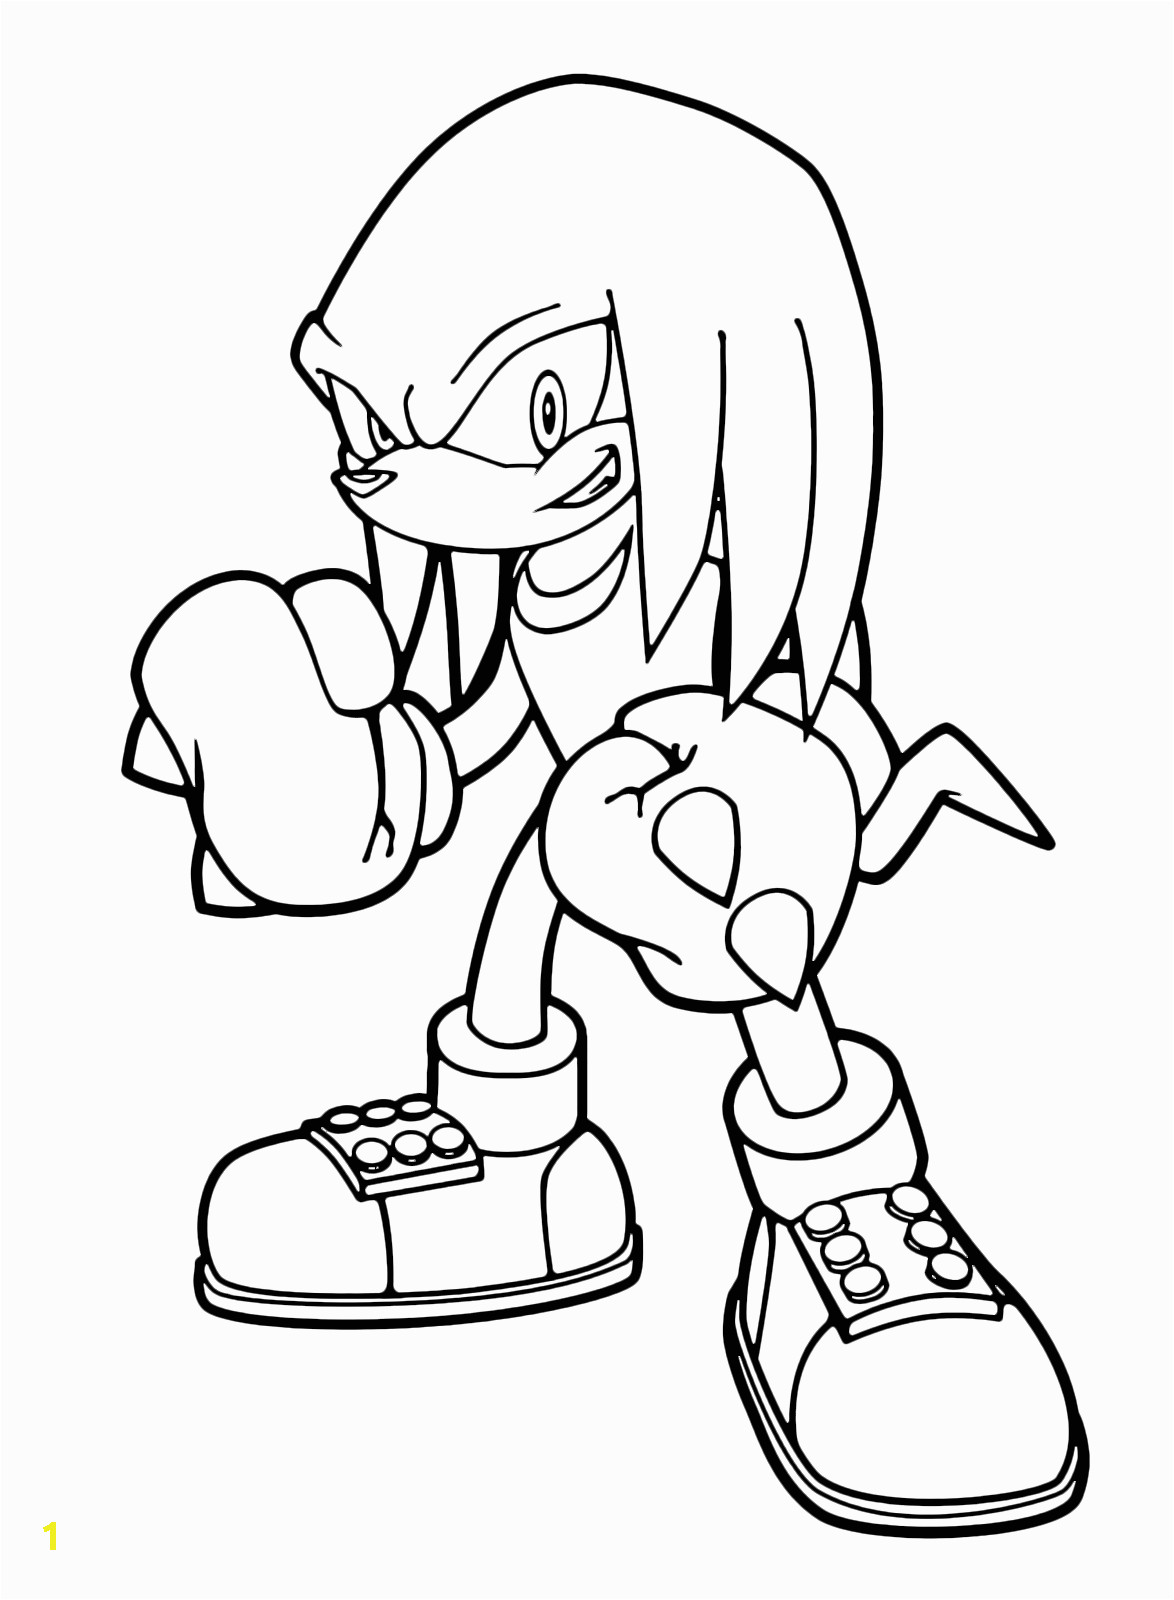 knuckles the echidna with his thorny fists